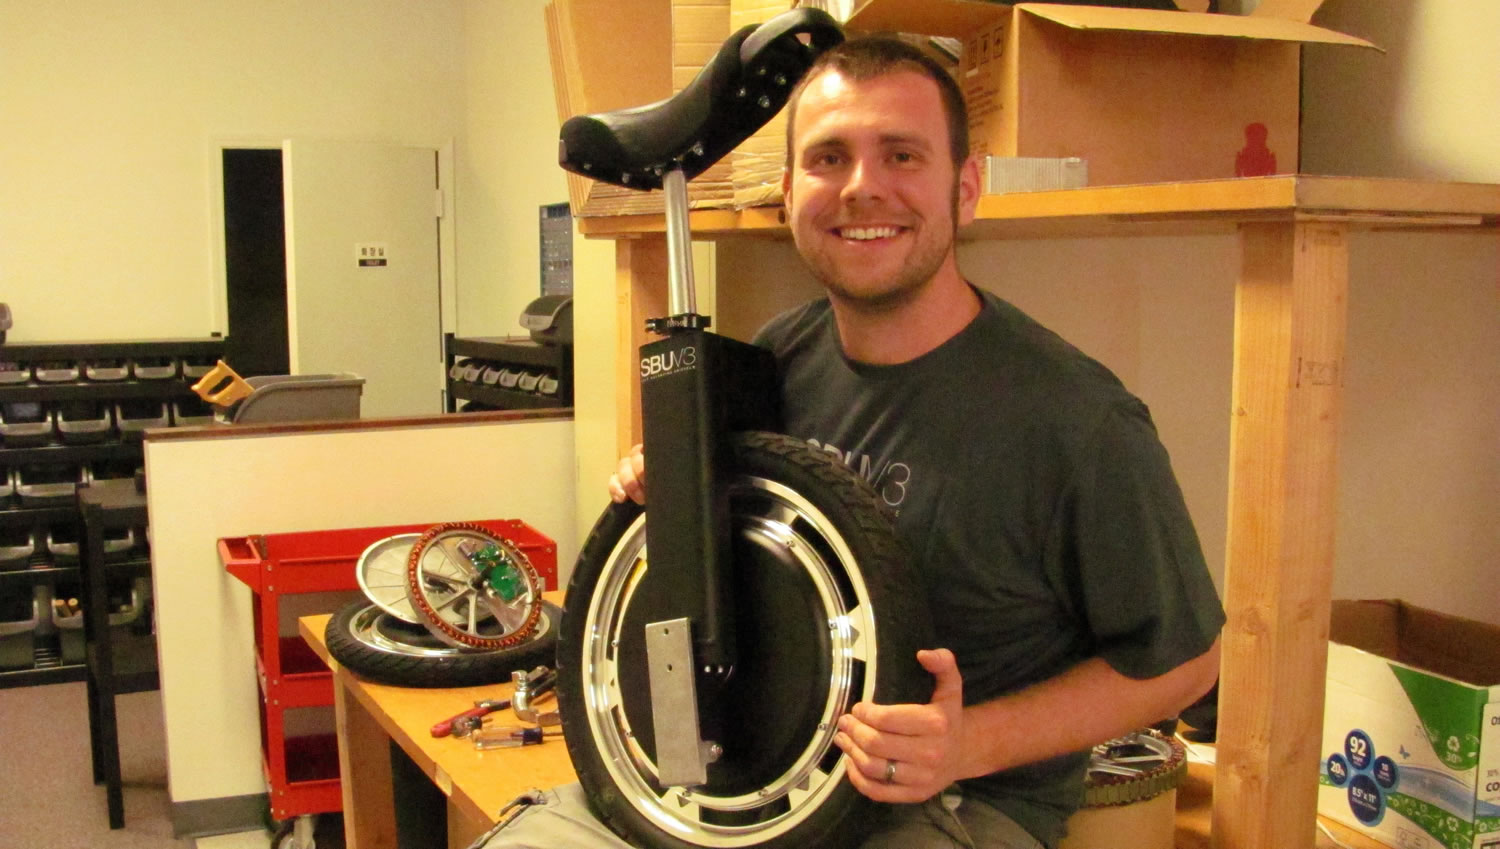 David Martschinske, a 2003 Camas High School graduate, is enjoying promoting the Self Balancing Unicycle. He is co-owner of Focus Designs Inc., with Daniel Wood and Rick Johannessen.